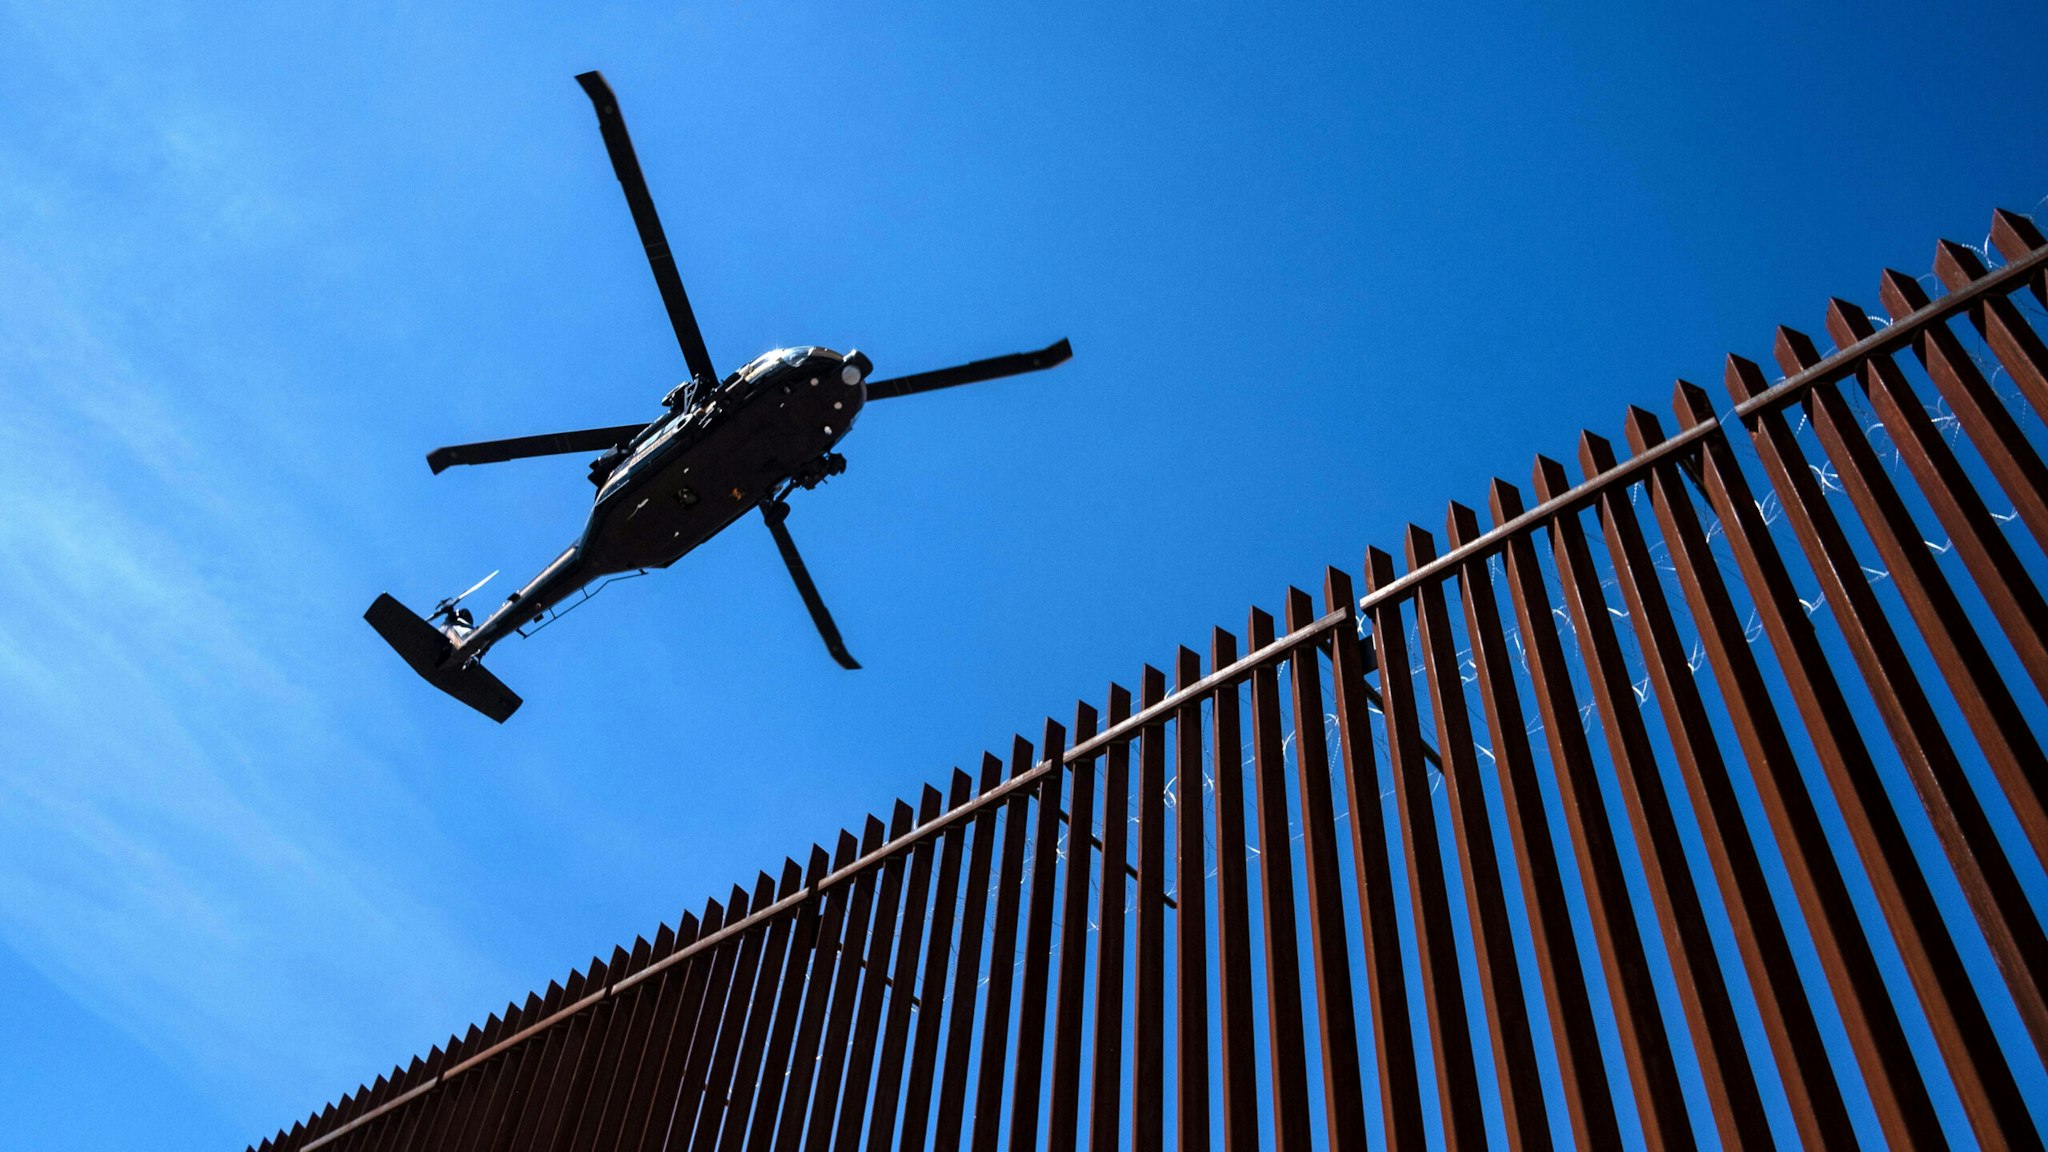 A US border patrol helicopter overflies the US-Mexico border fence as US President Donald Trump visits Calexico, California, as seen from Mexicali, Baja California state, Mexico, on April 5, 2019. - President Donald Trump flew Friday to visit newly built fencing on the Mexican border, even as he retreated from a threat to shut the frontier over what he says is an out-of-control influx of migrants and drugs.